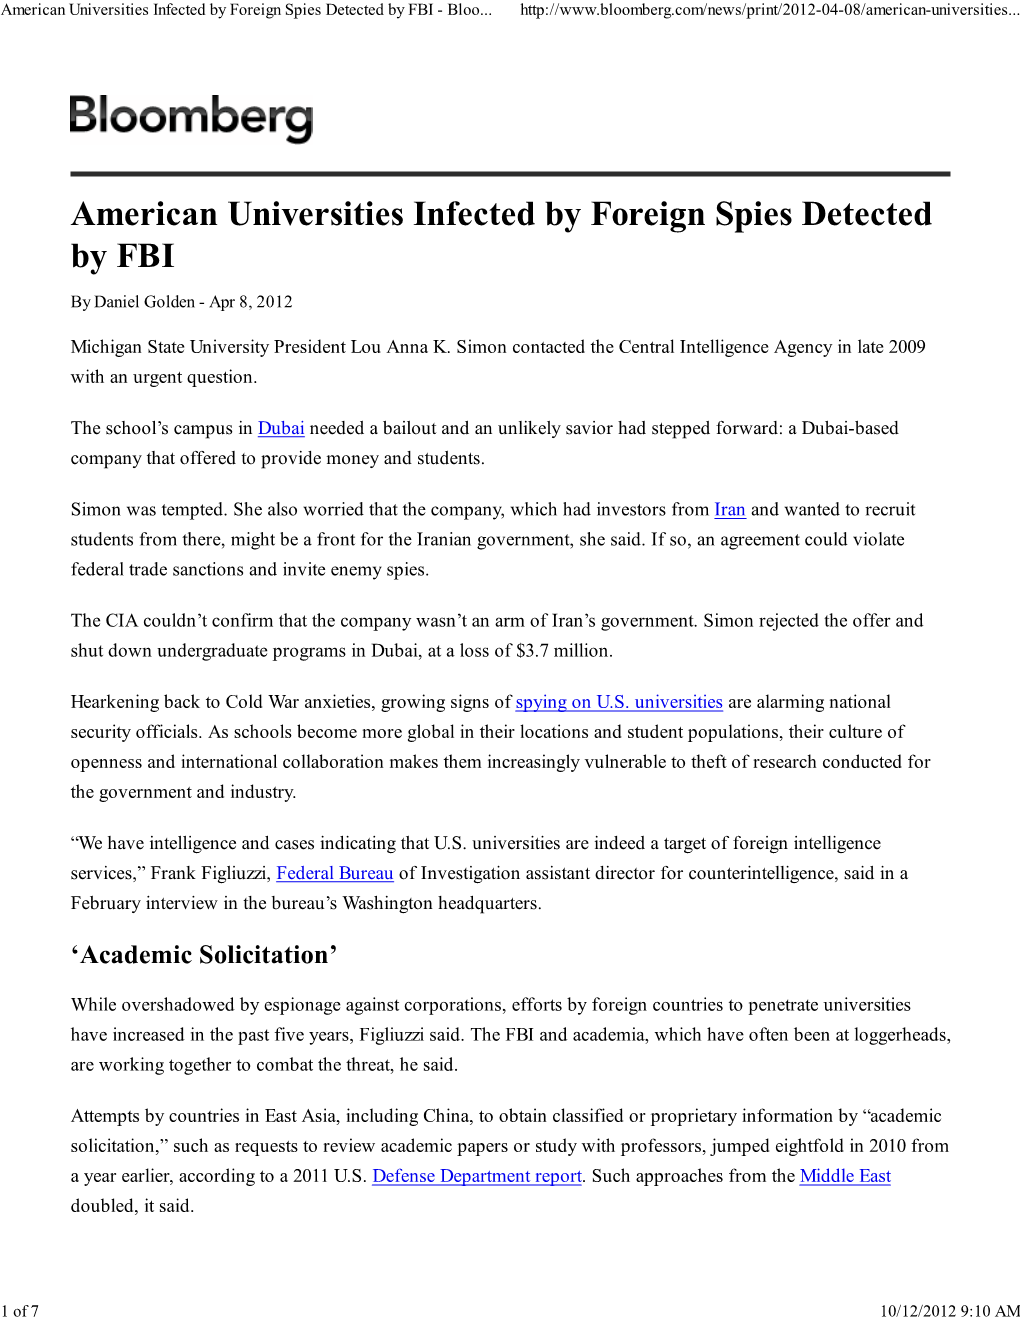 American Universities Infected by Foreign Spies Detected by FBI - Bloo